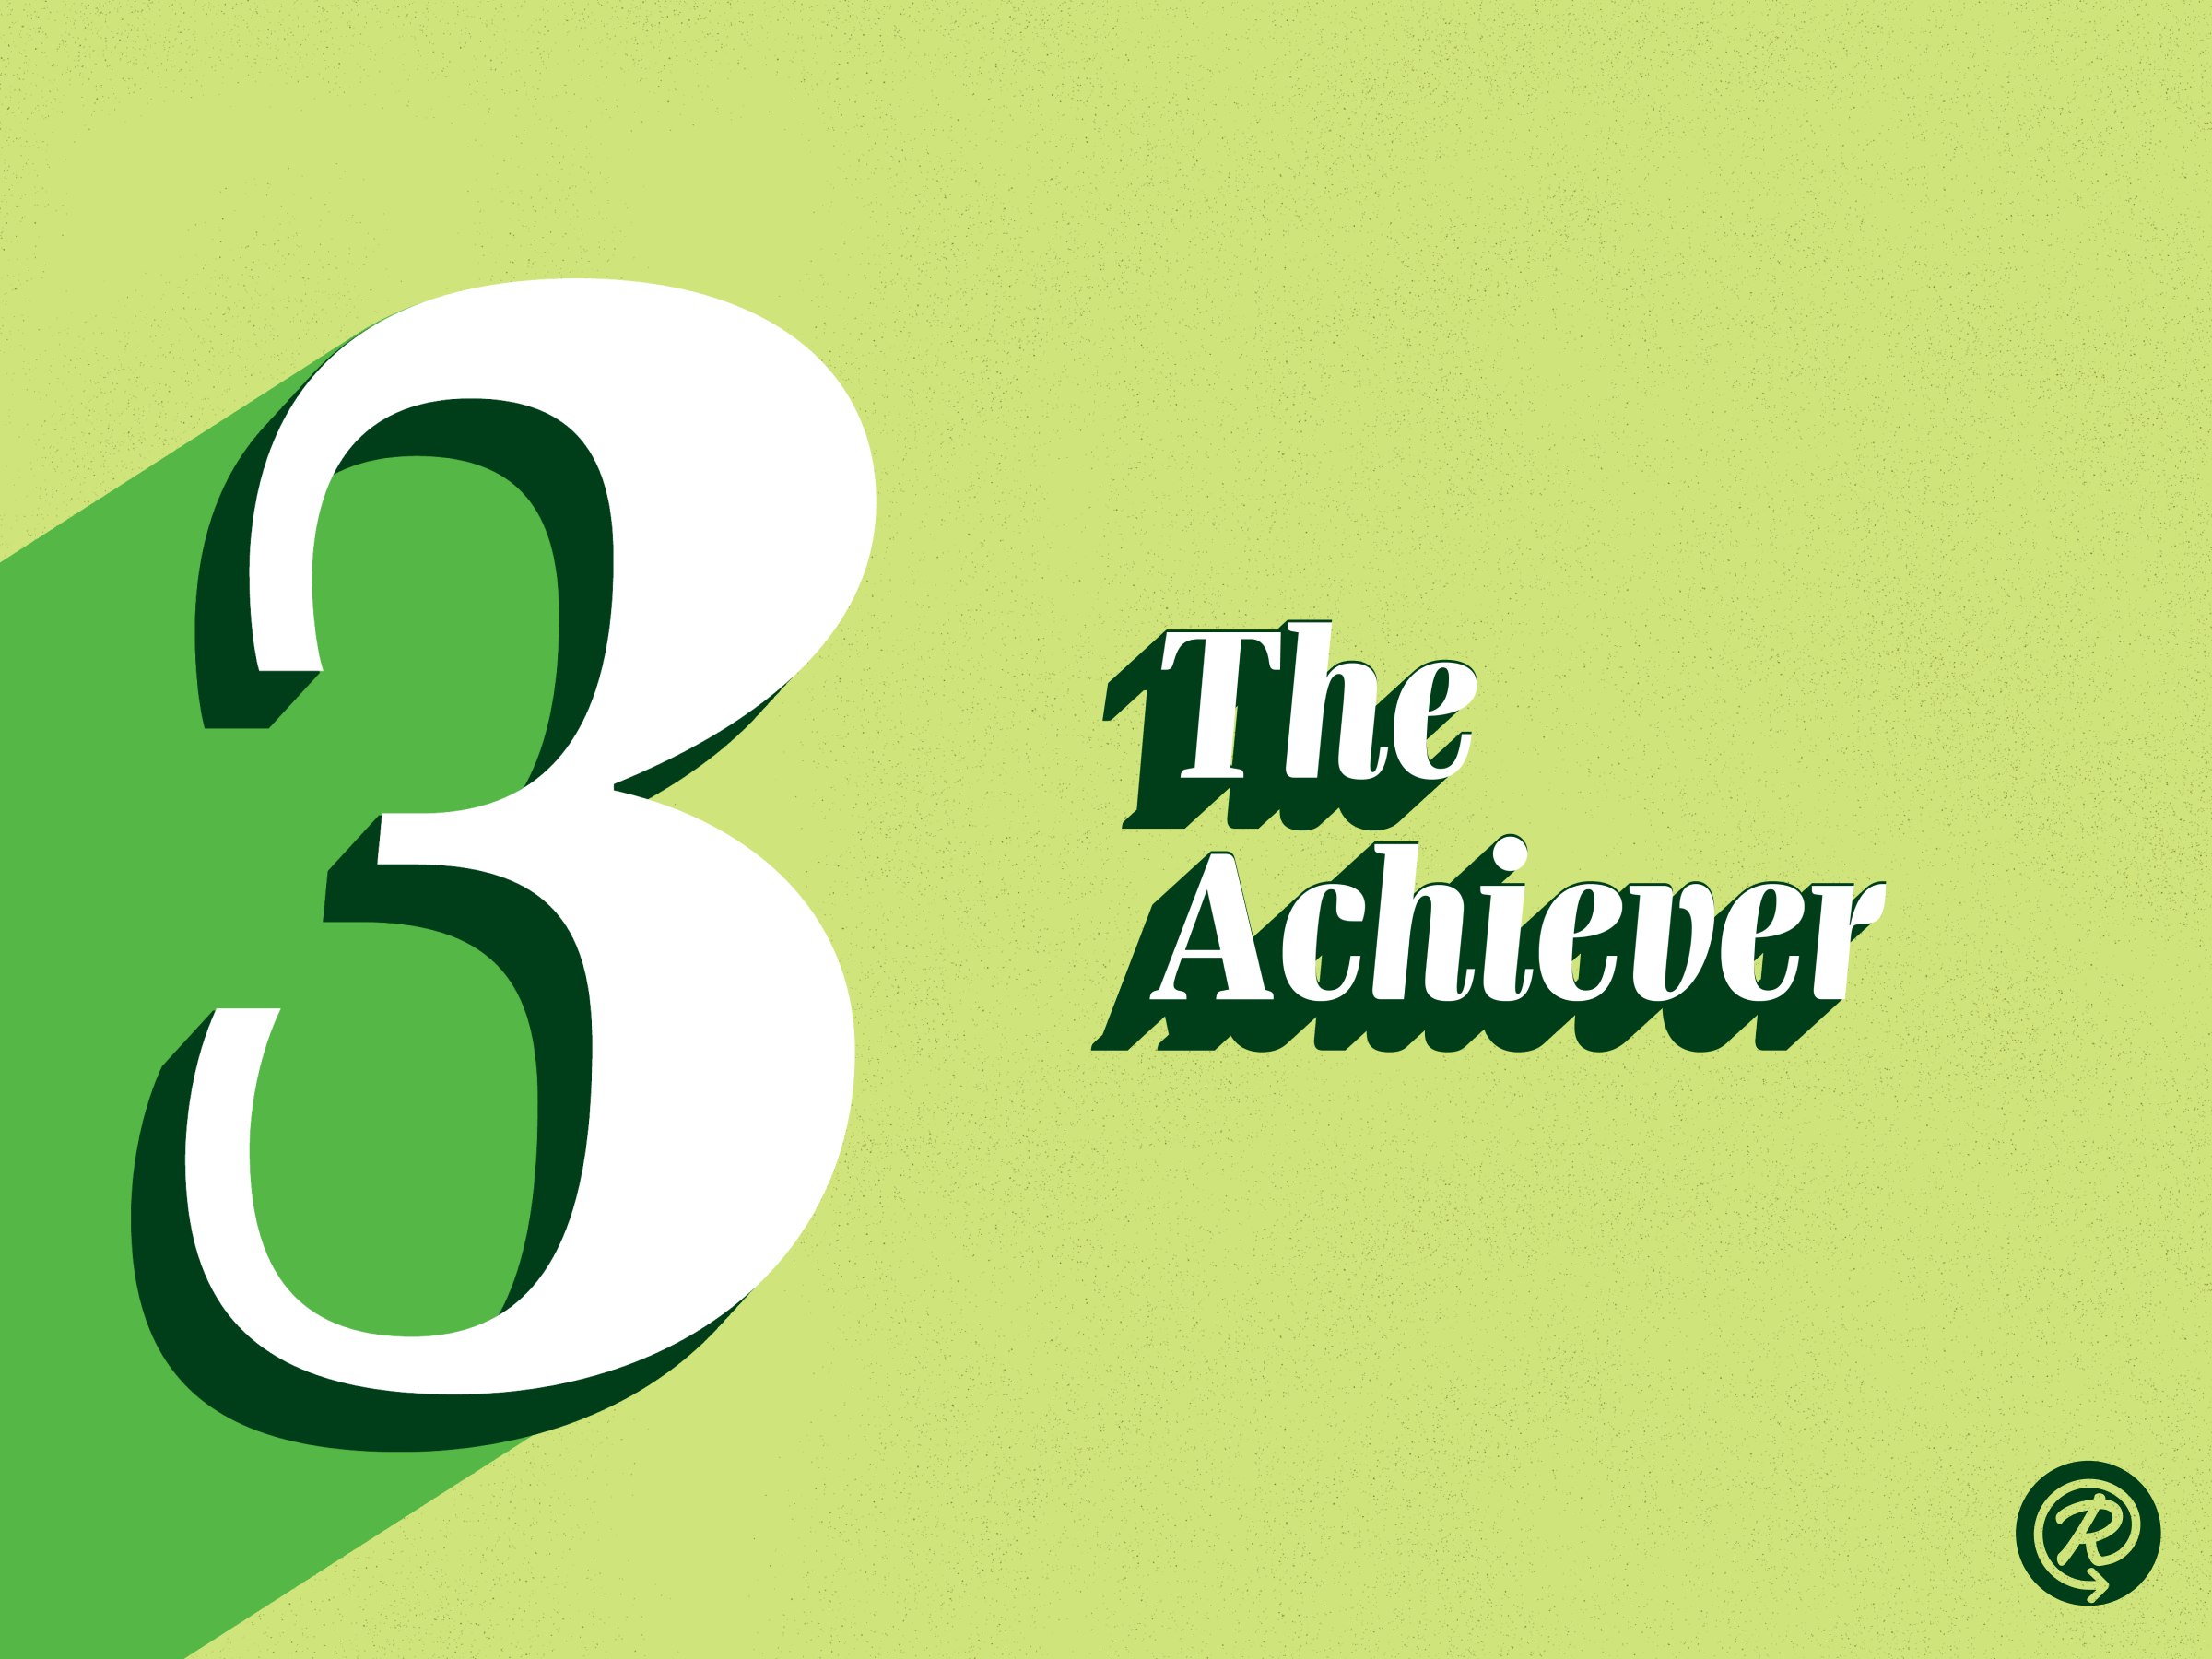 The Best Books for Enneagram Type Three – The Achiever